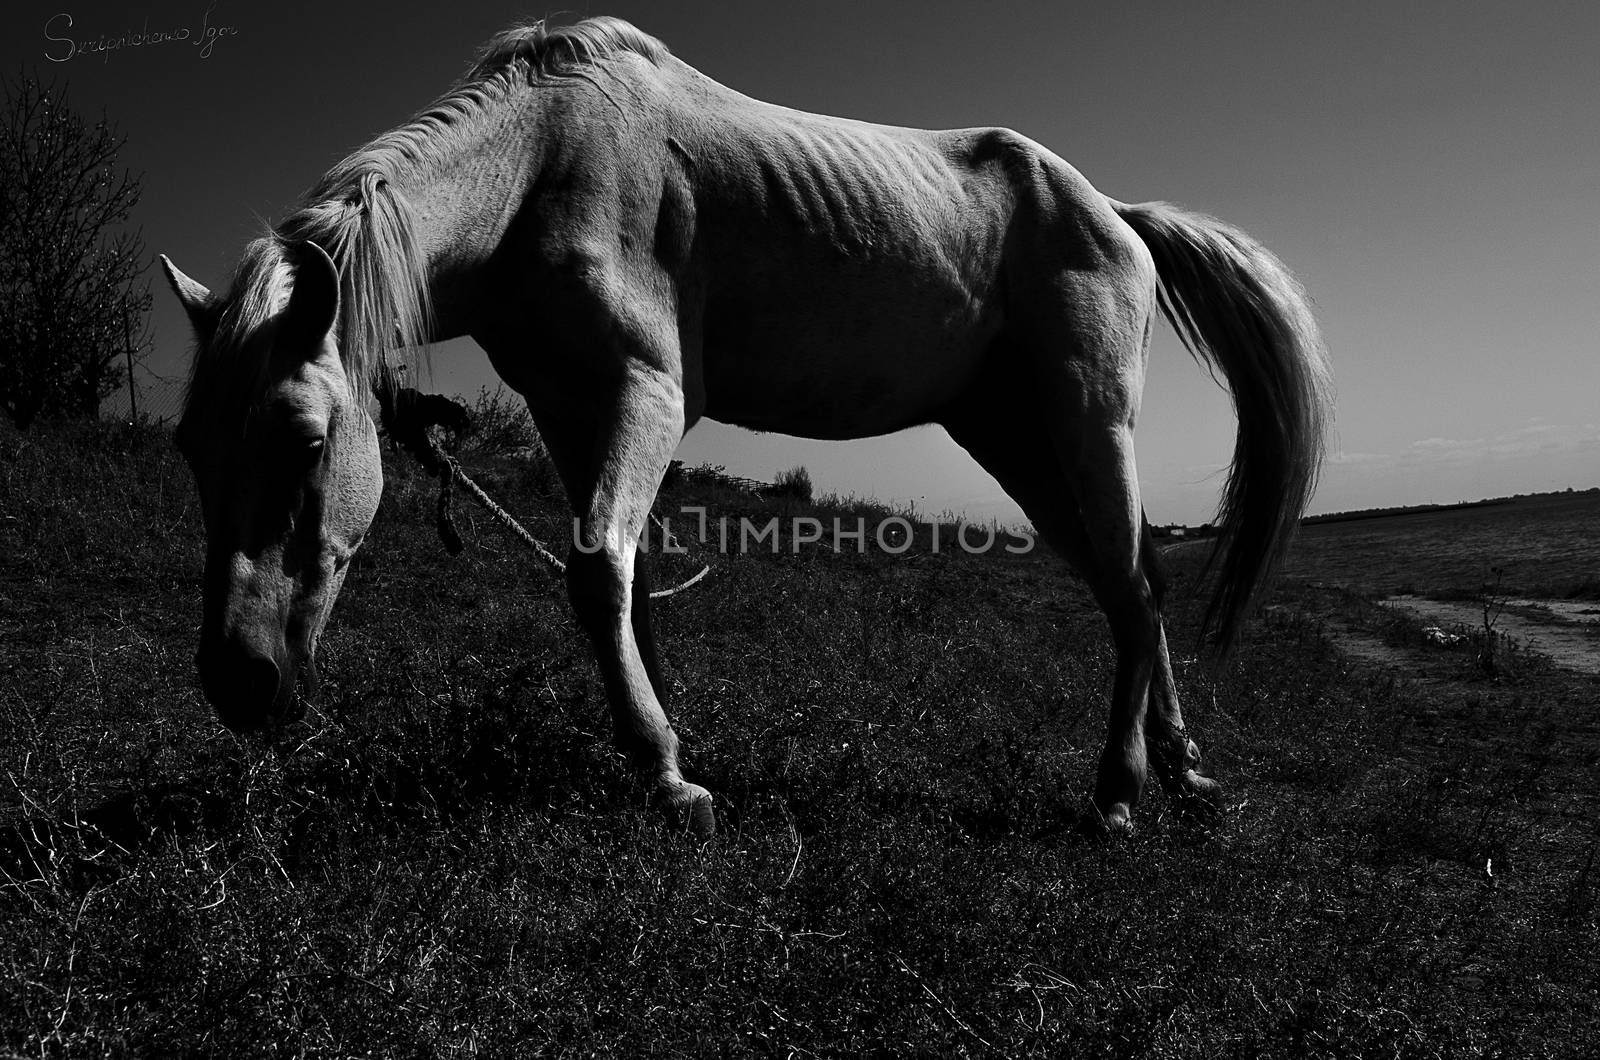 A beautiful white horse grazing in a field near the river. Black and white photo. Horizontal